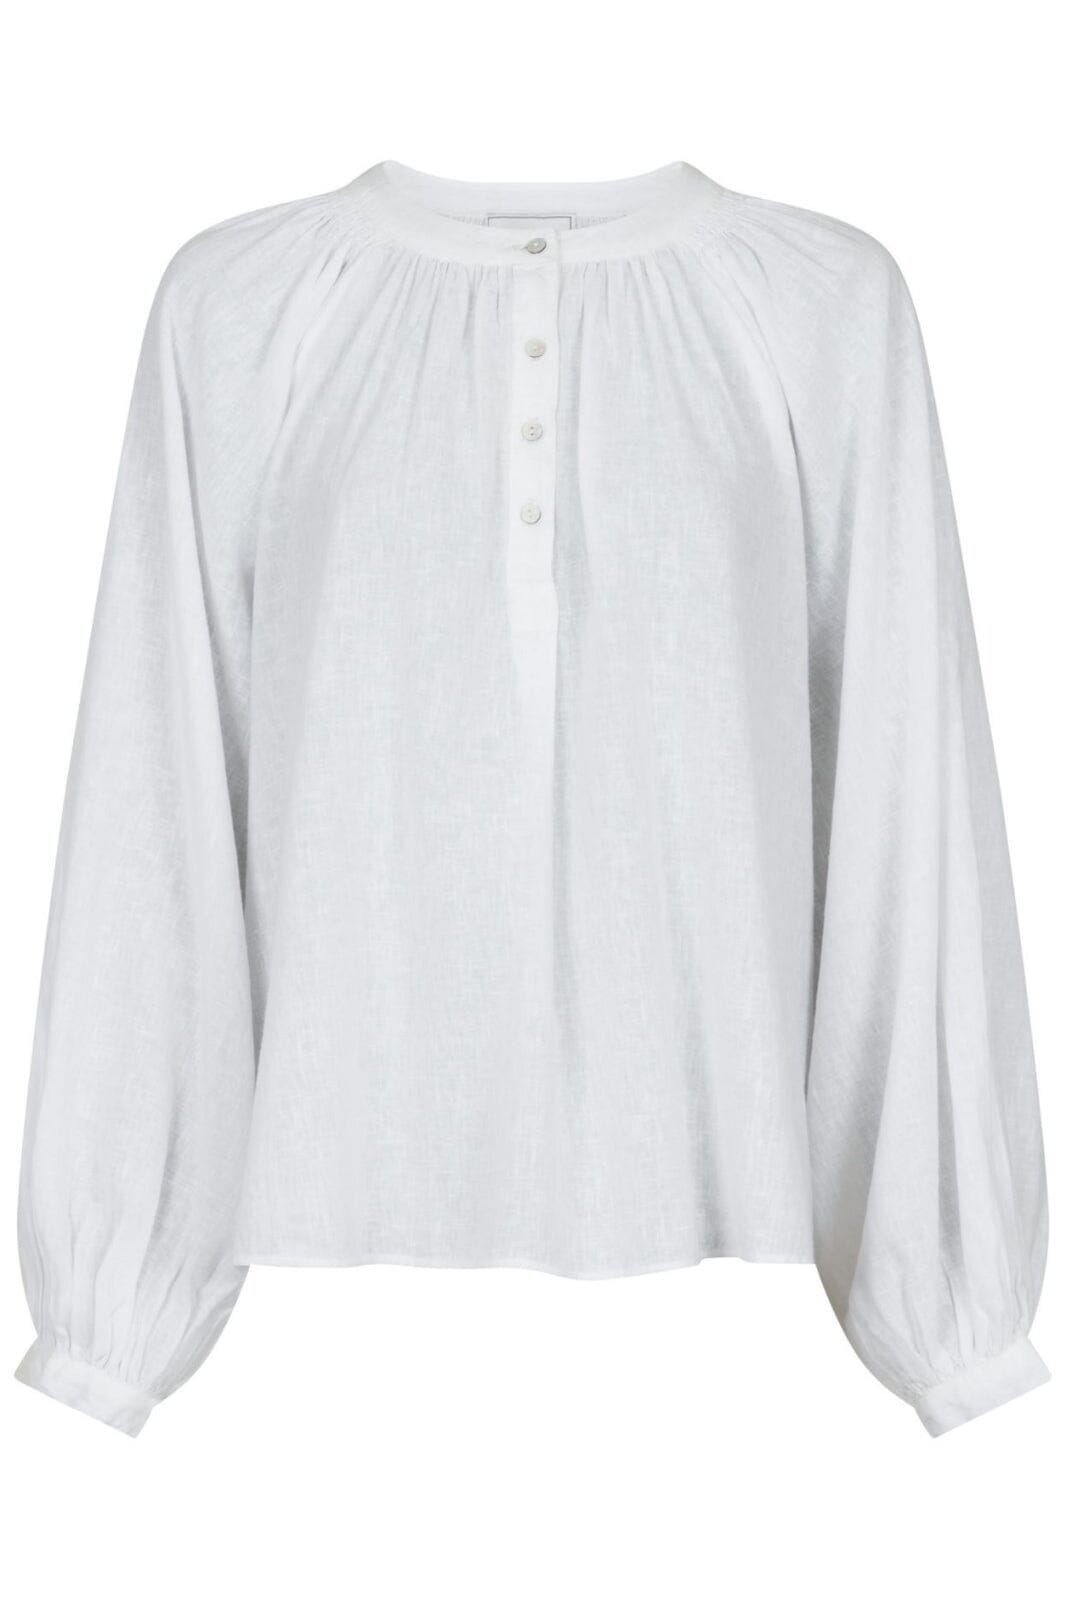 Neo Noir - Kirsty Solid Blouse - White Bluser 